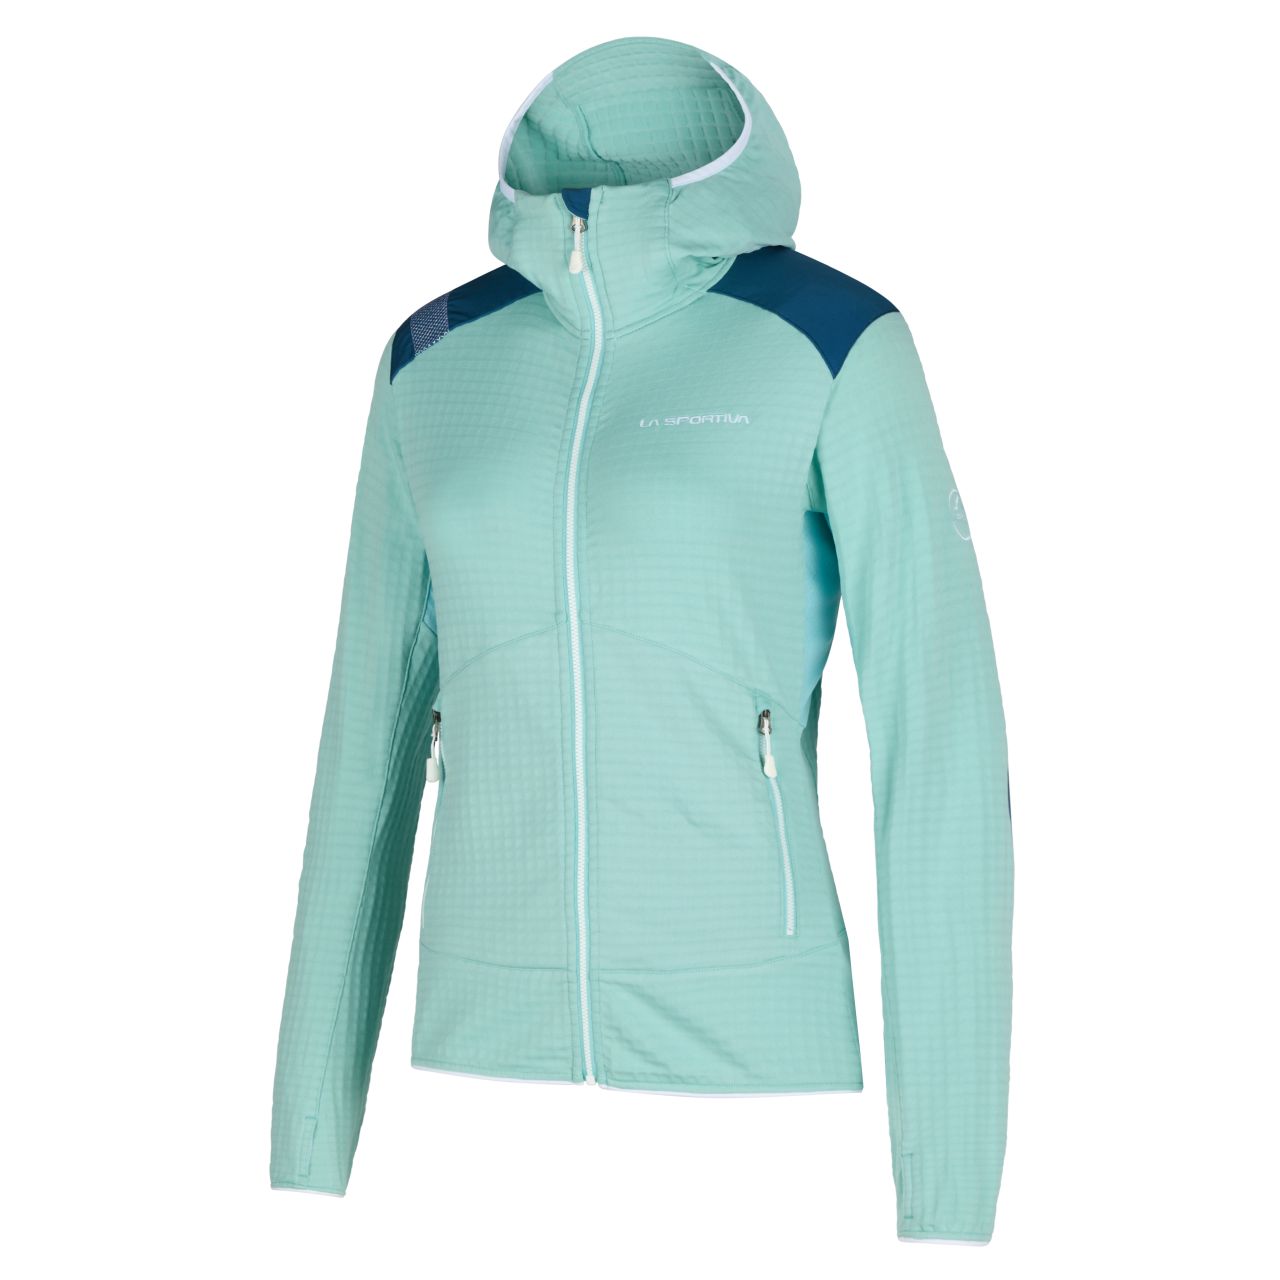 Lucendro Thermal 2.0 Hoody Woman Iceberg/Storm Blue